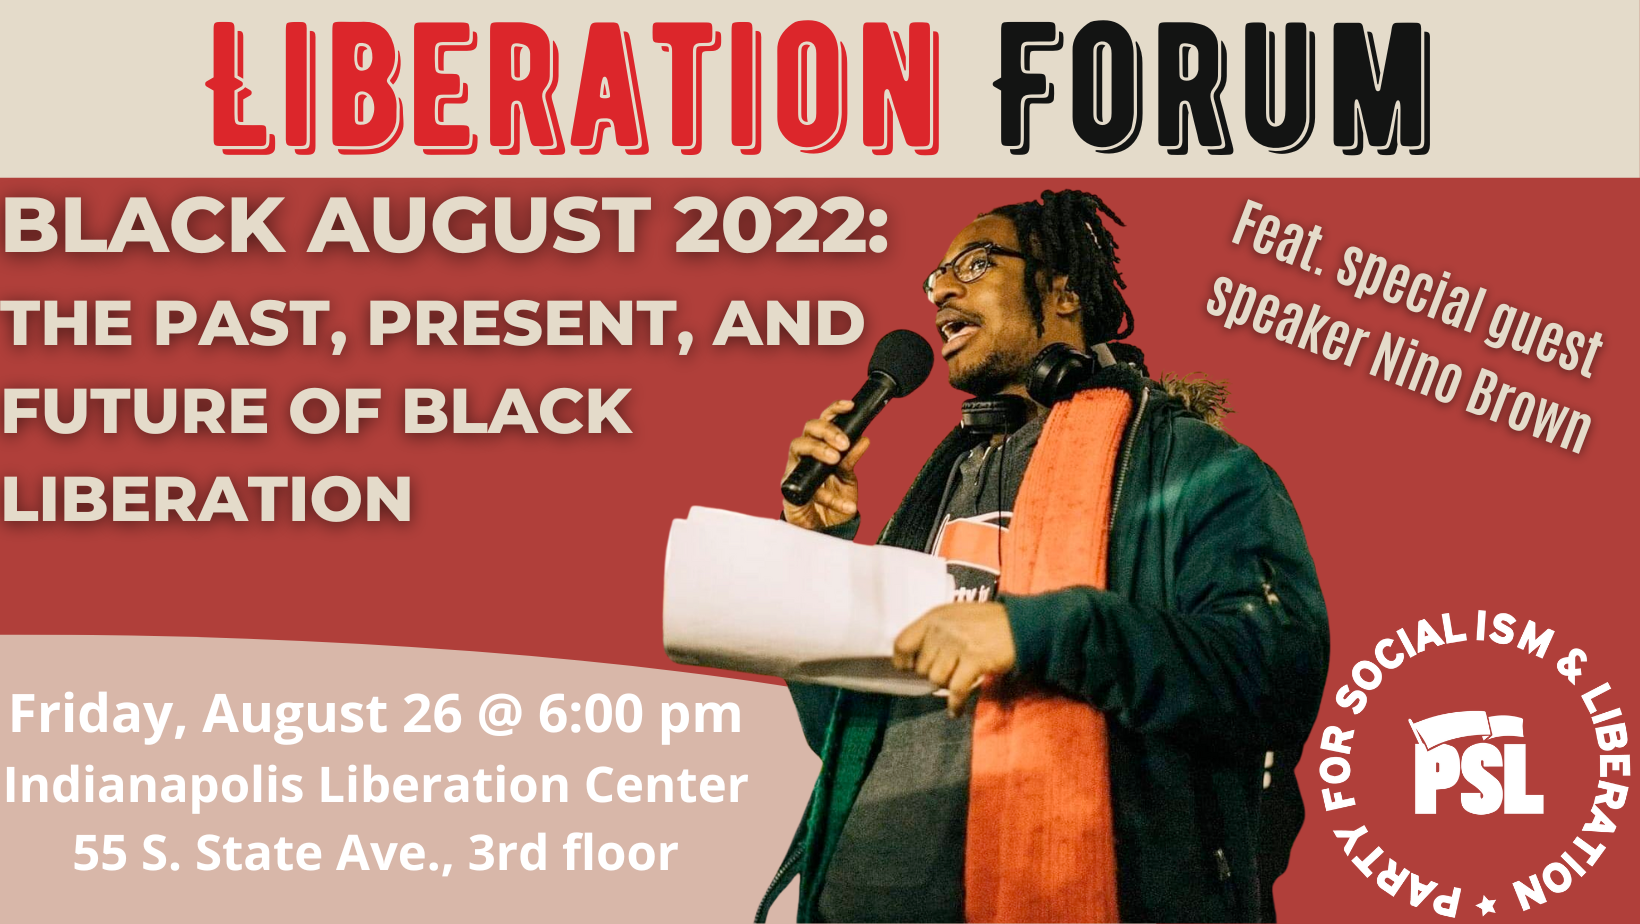 Black August The promise of Black Liberation, 8/26 Indianapolis